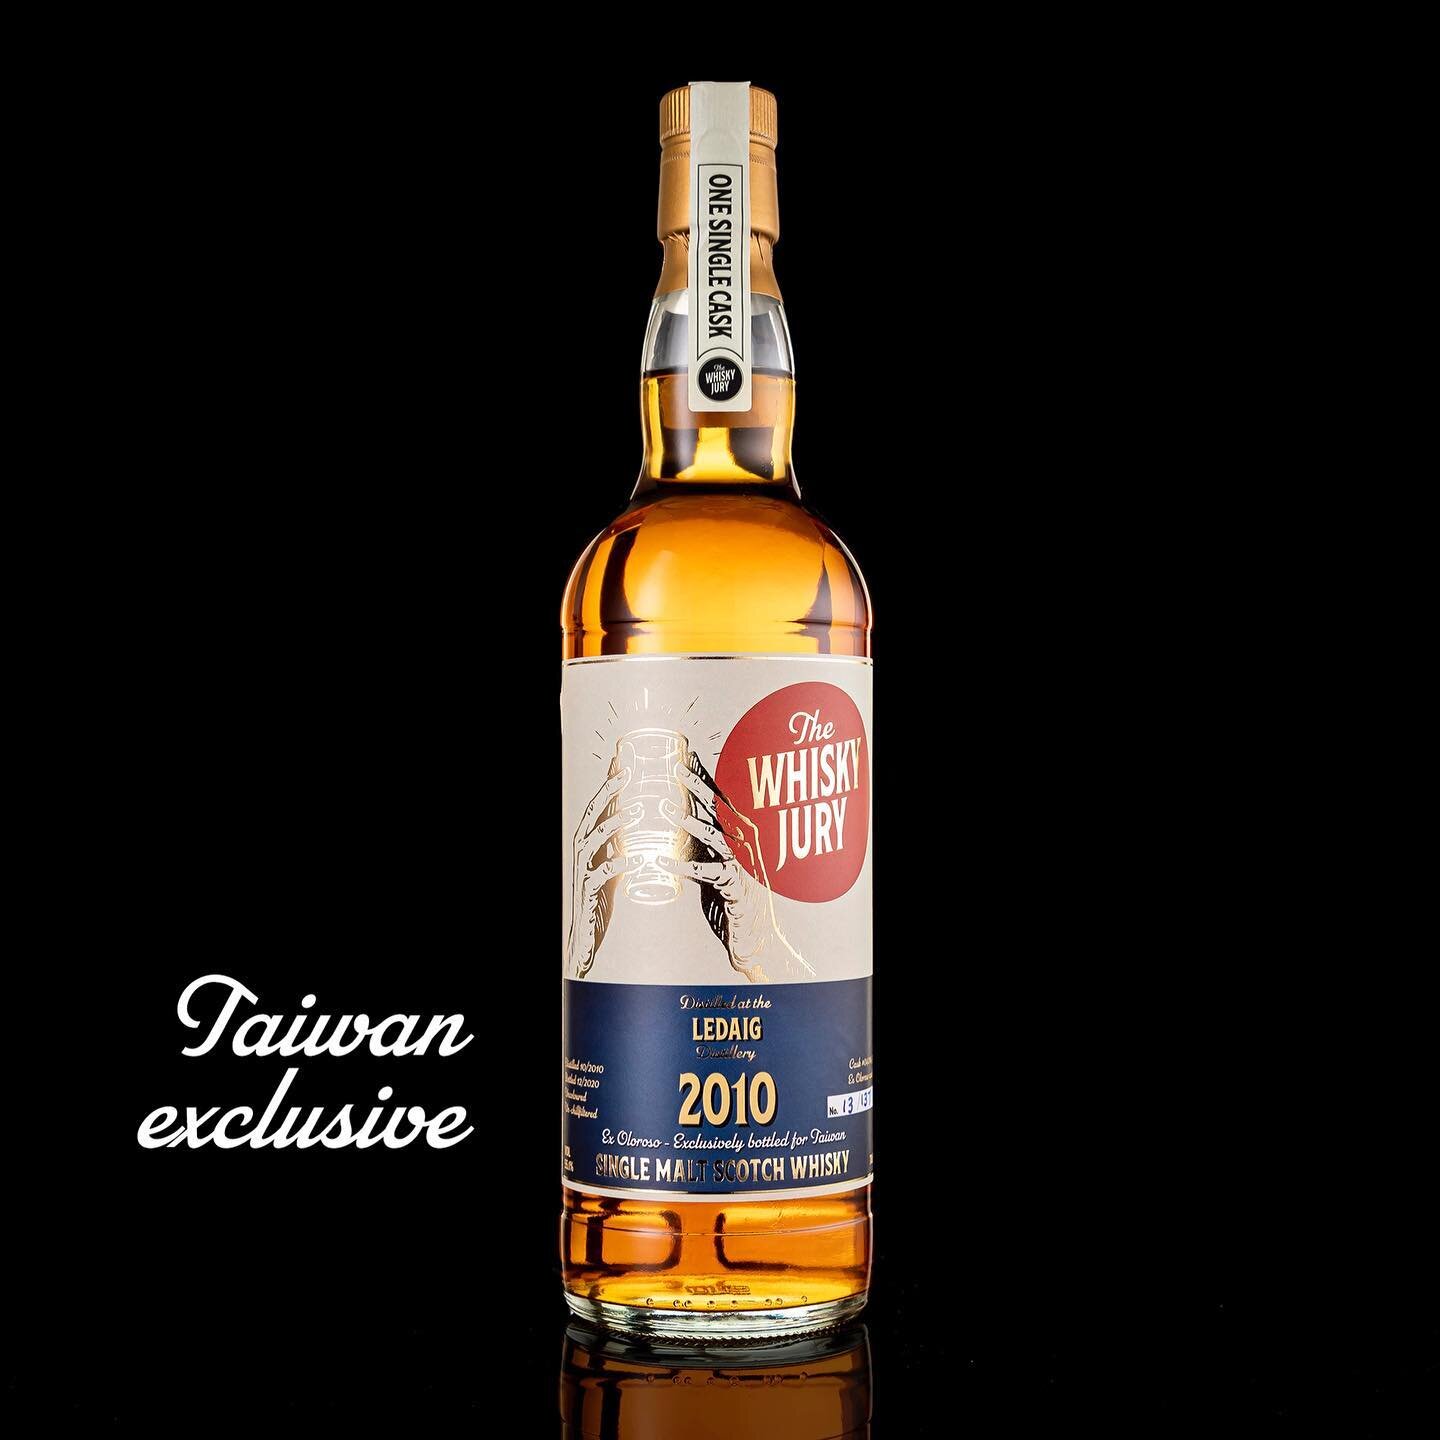 A 2010 Ledaig exclusive to Taiwan. Keep an eye on whisky-age.com ... @whiskyage.tw  Cheers to all our friends in Taiwan 🙌🏻❤️
.
.
#thewhiskyjury #ledaig #tobermory #tobermorydistillery #whiskynews #sherriedwhisky #peated #peatedwhisky #independentbo